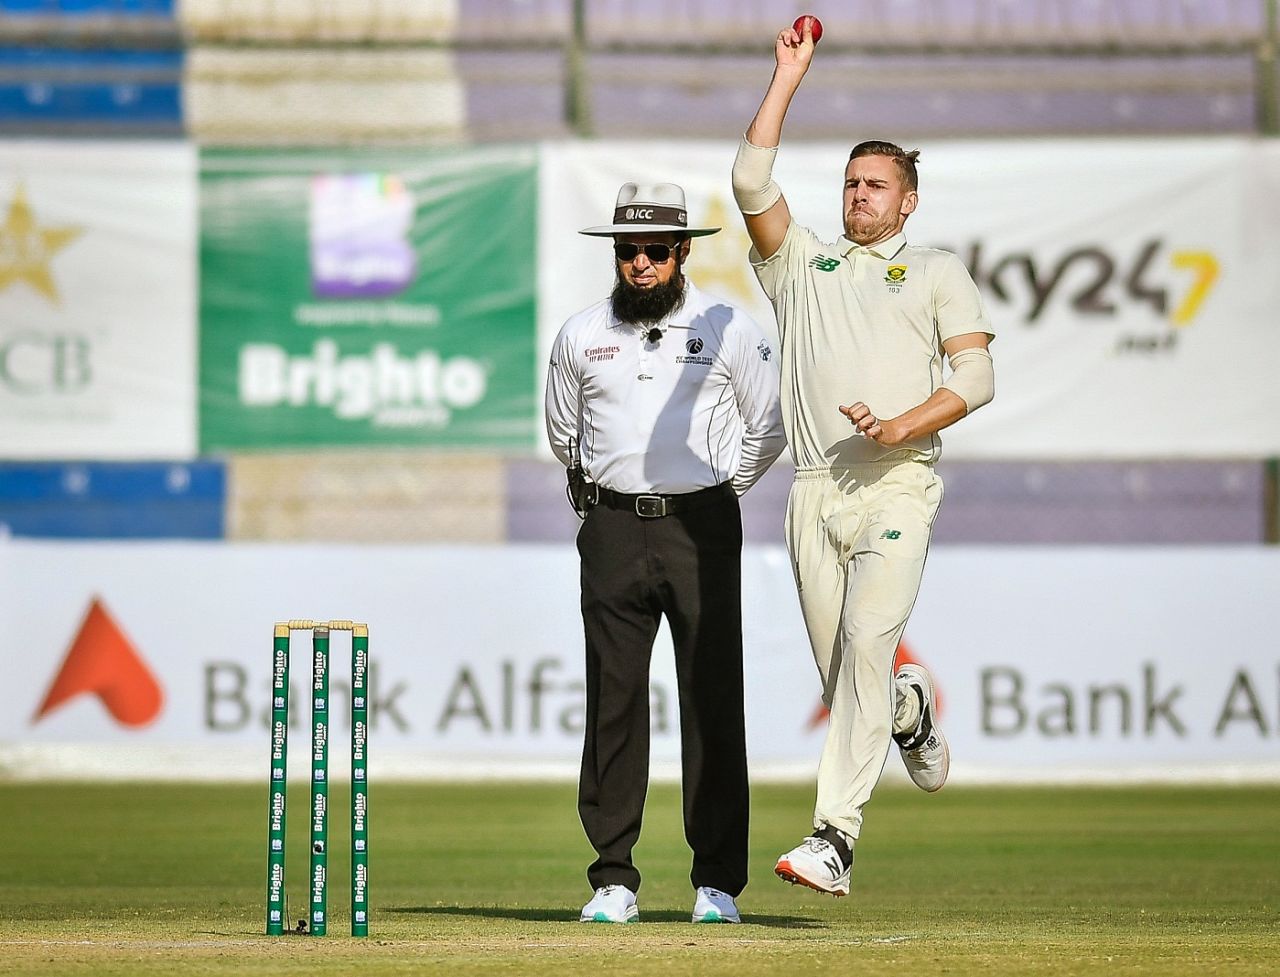 Anrich Nortje found no success in the morning session, Pakistan vs South Africa, 1st Test, Karachi, 2nd day, January 27, 2021